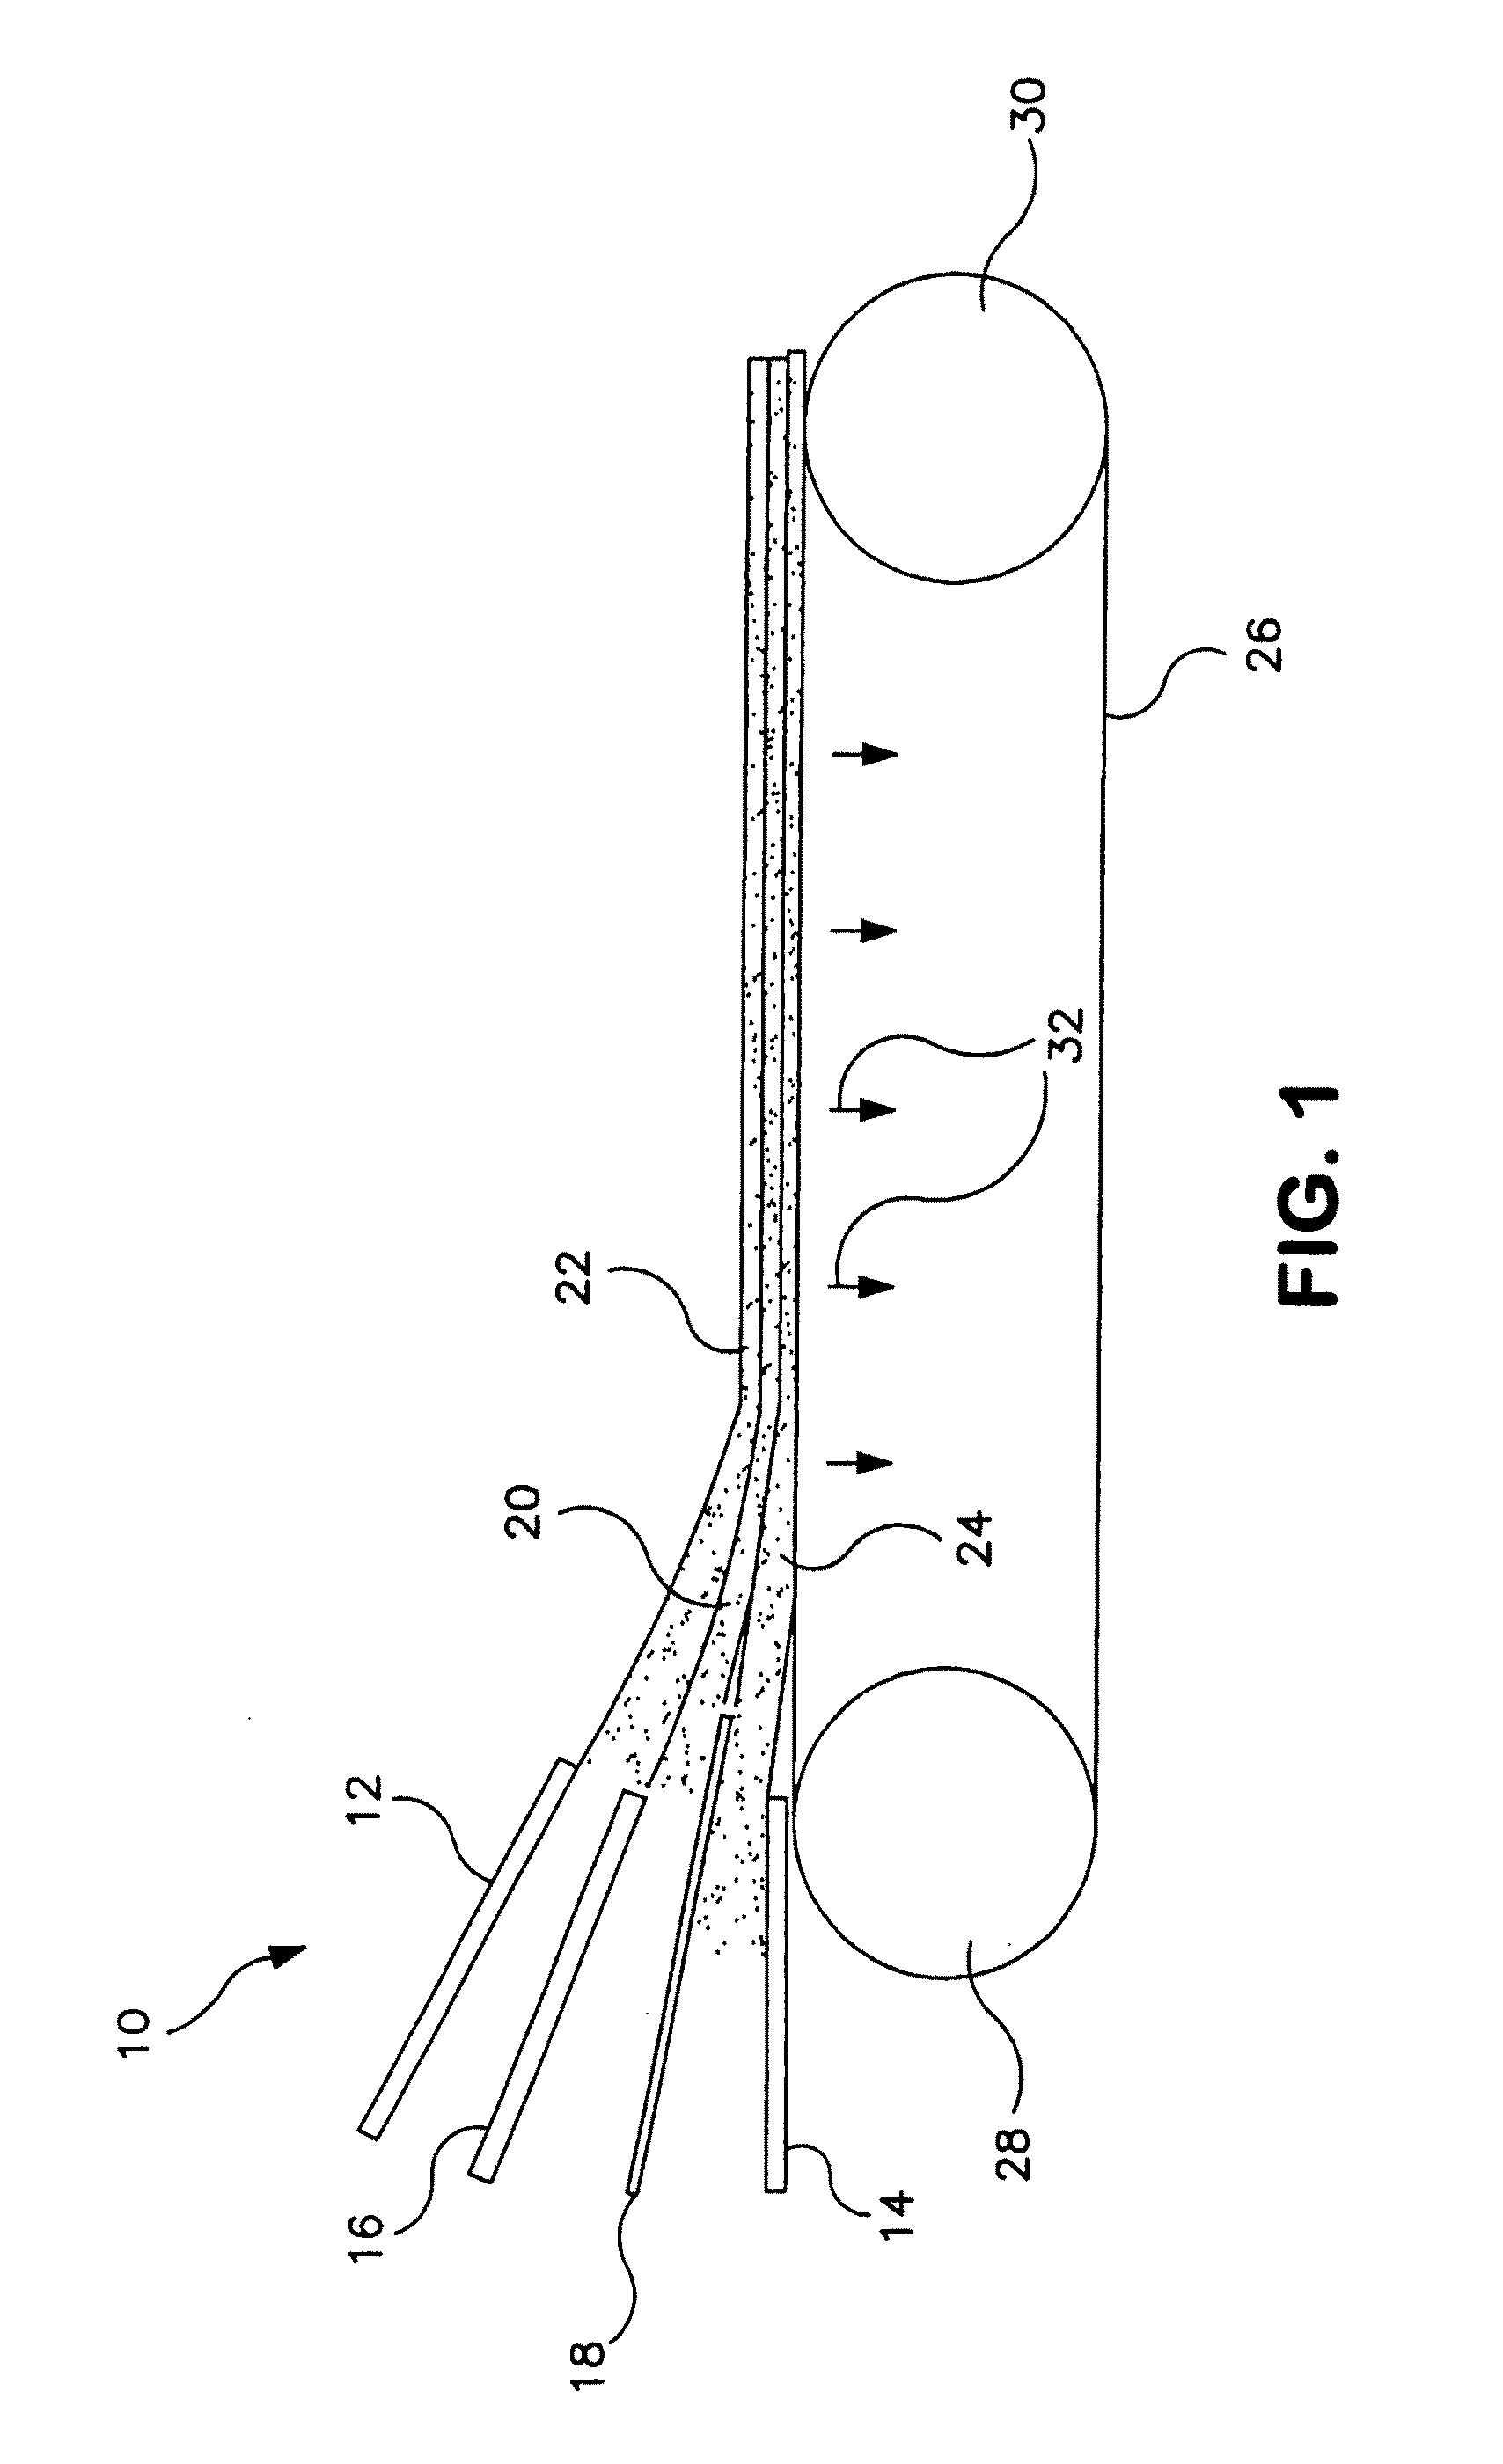 Additive compositions for treating various base sheets